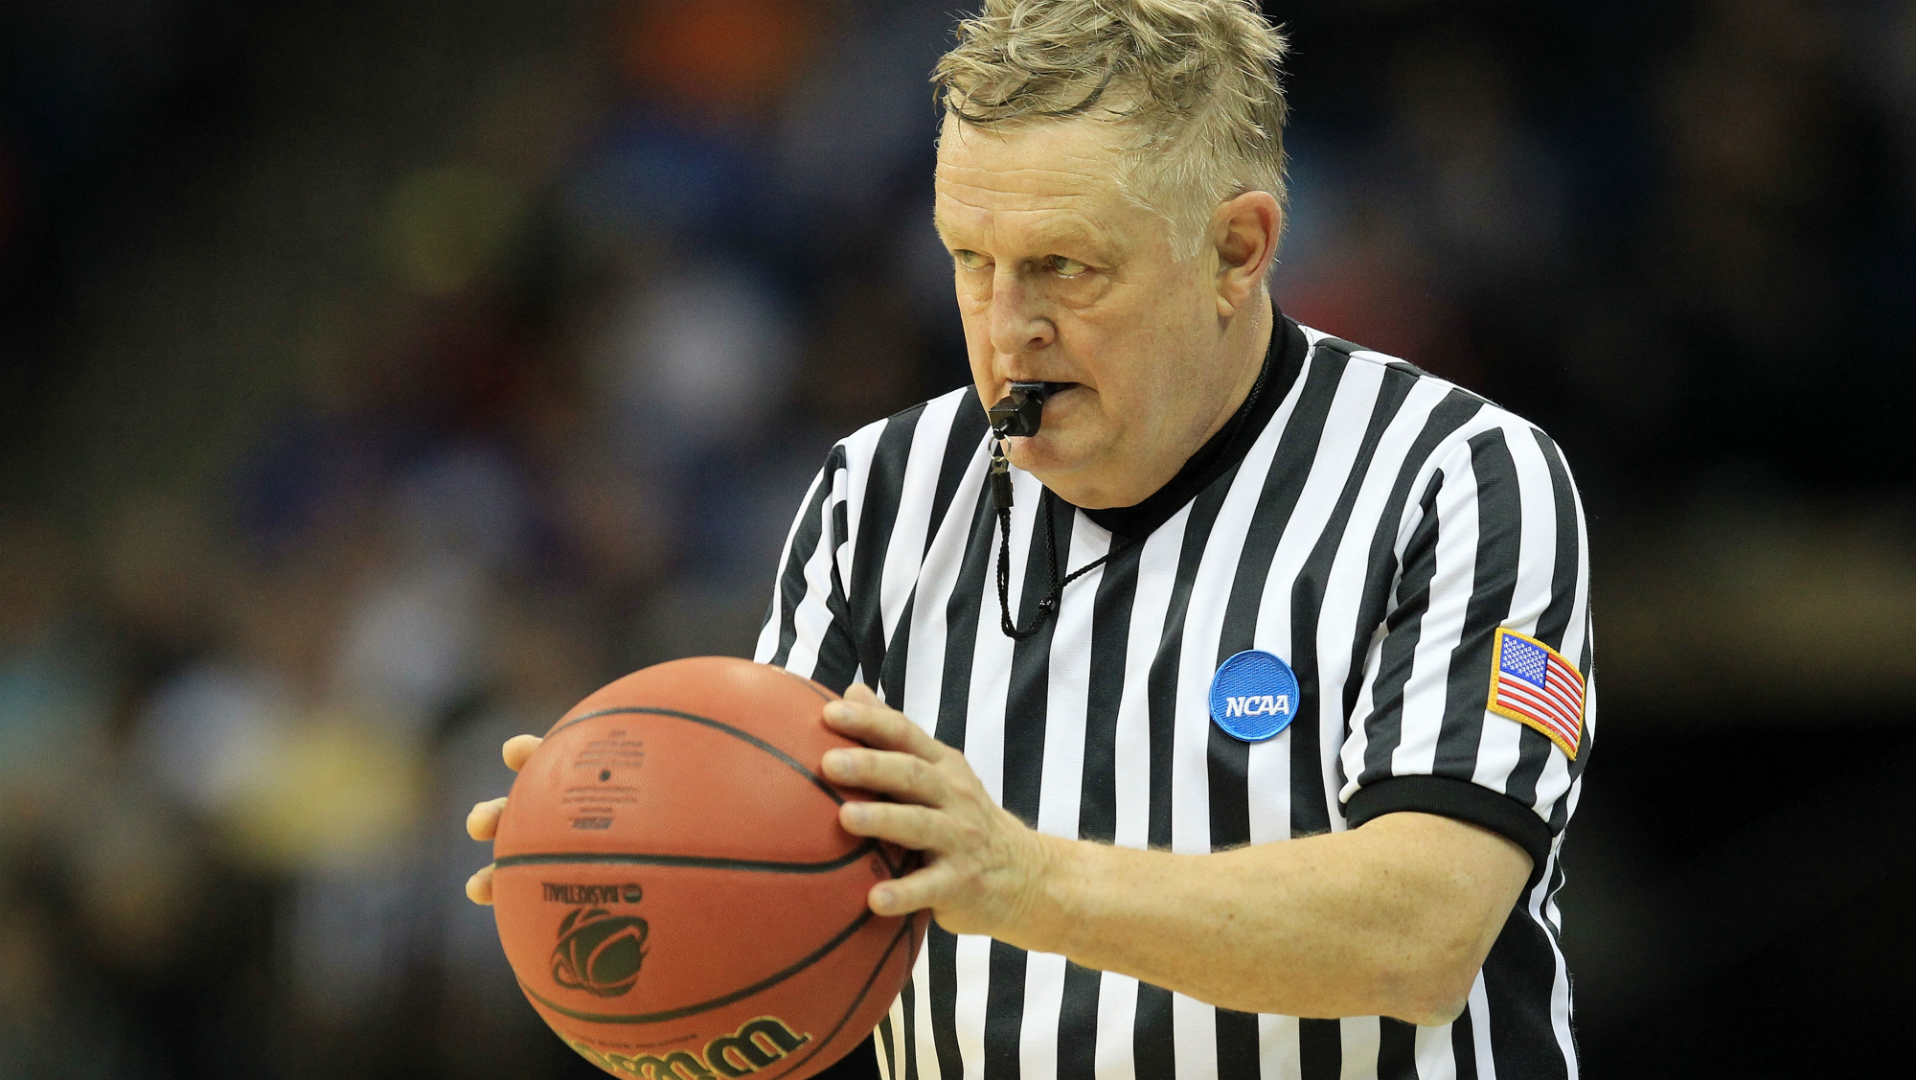 NCAA referee Jim Burr retires after 39 years NCAA Basketball